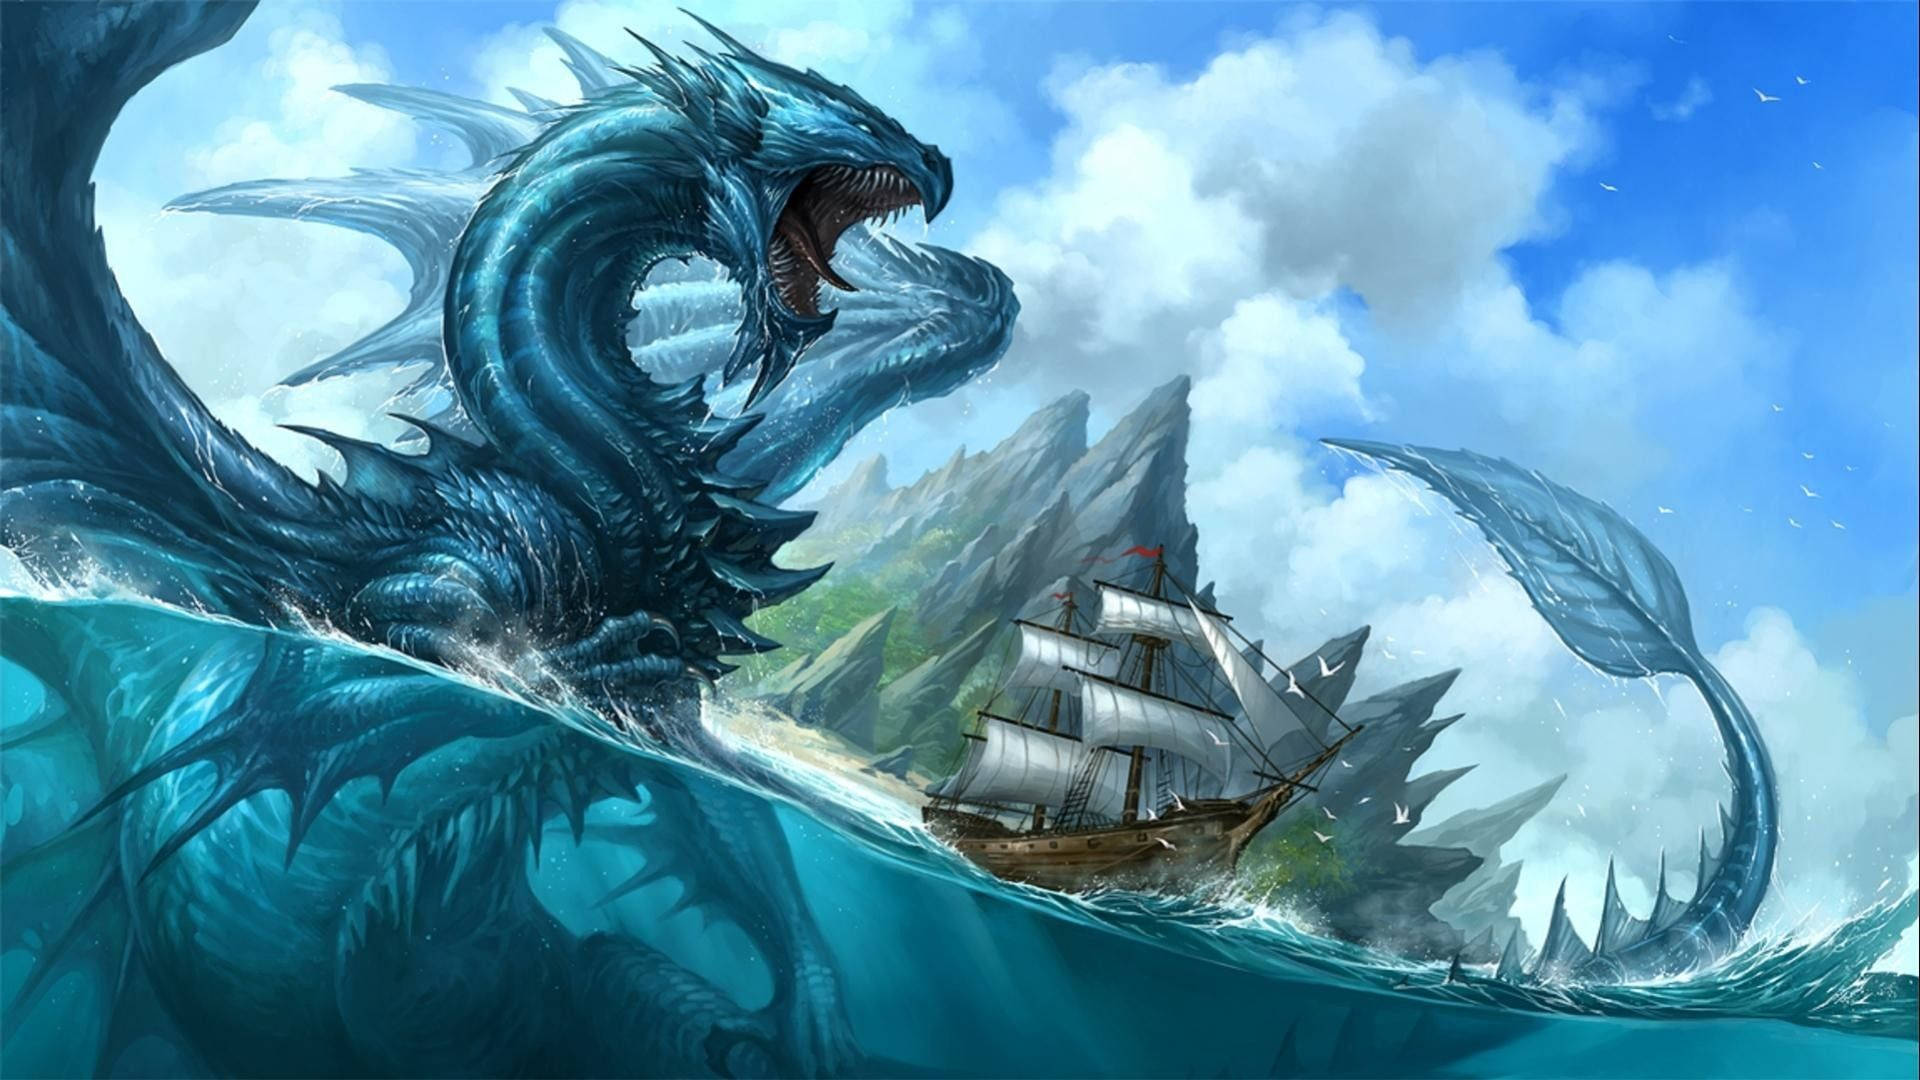 Download Mythical Creature Sea Serpent Wallpaper